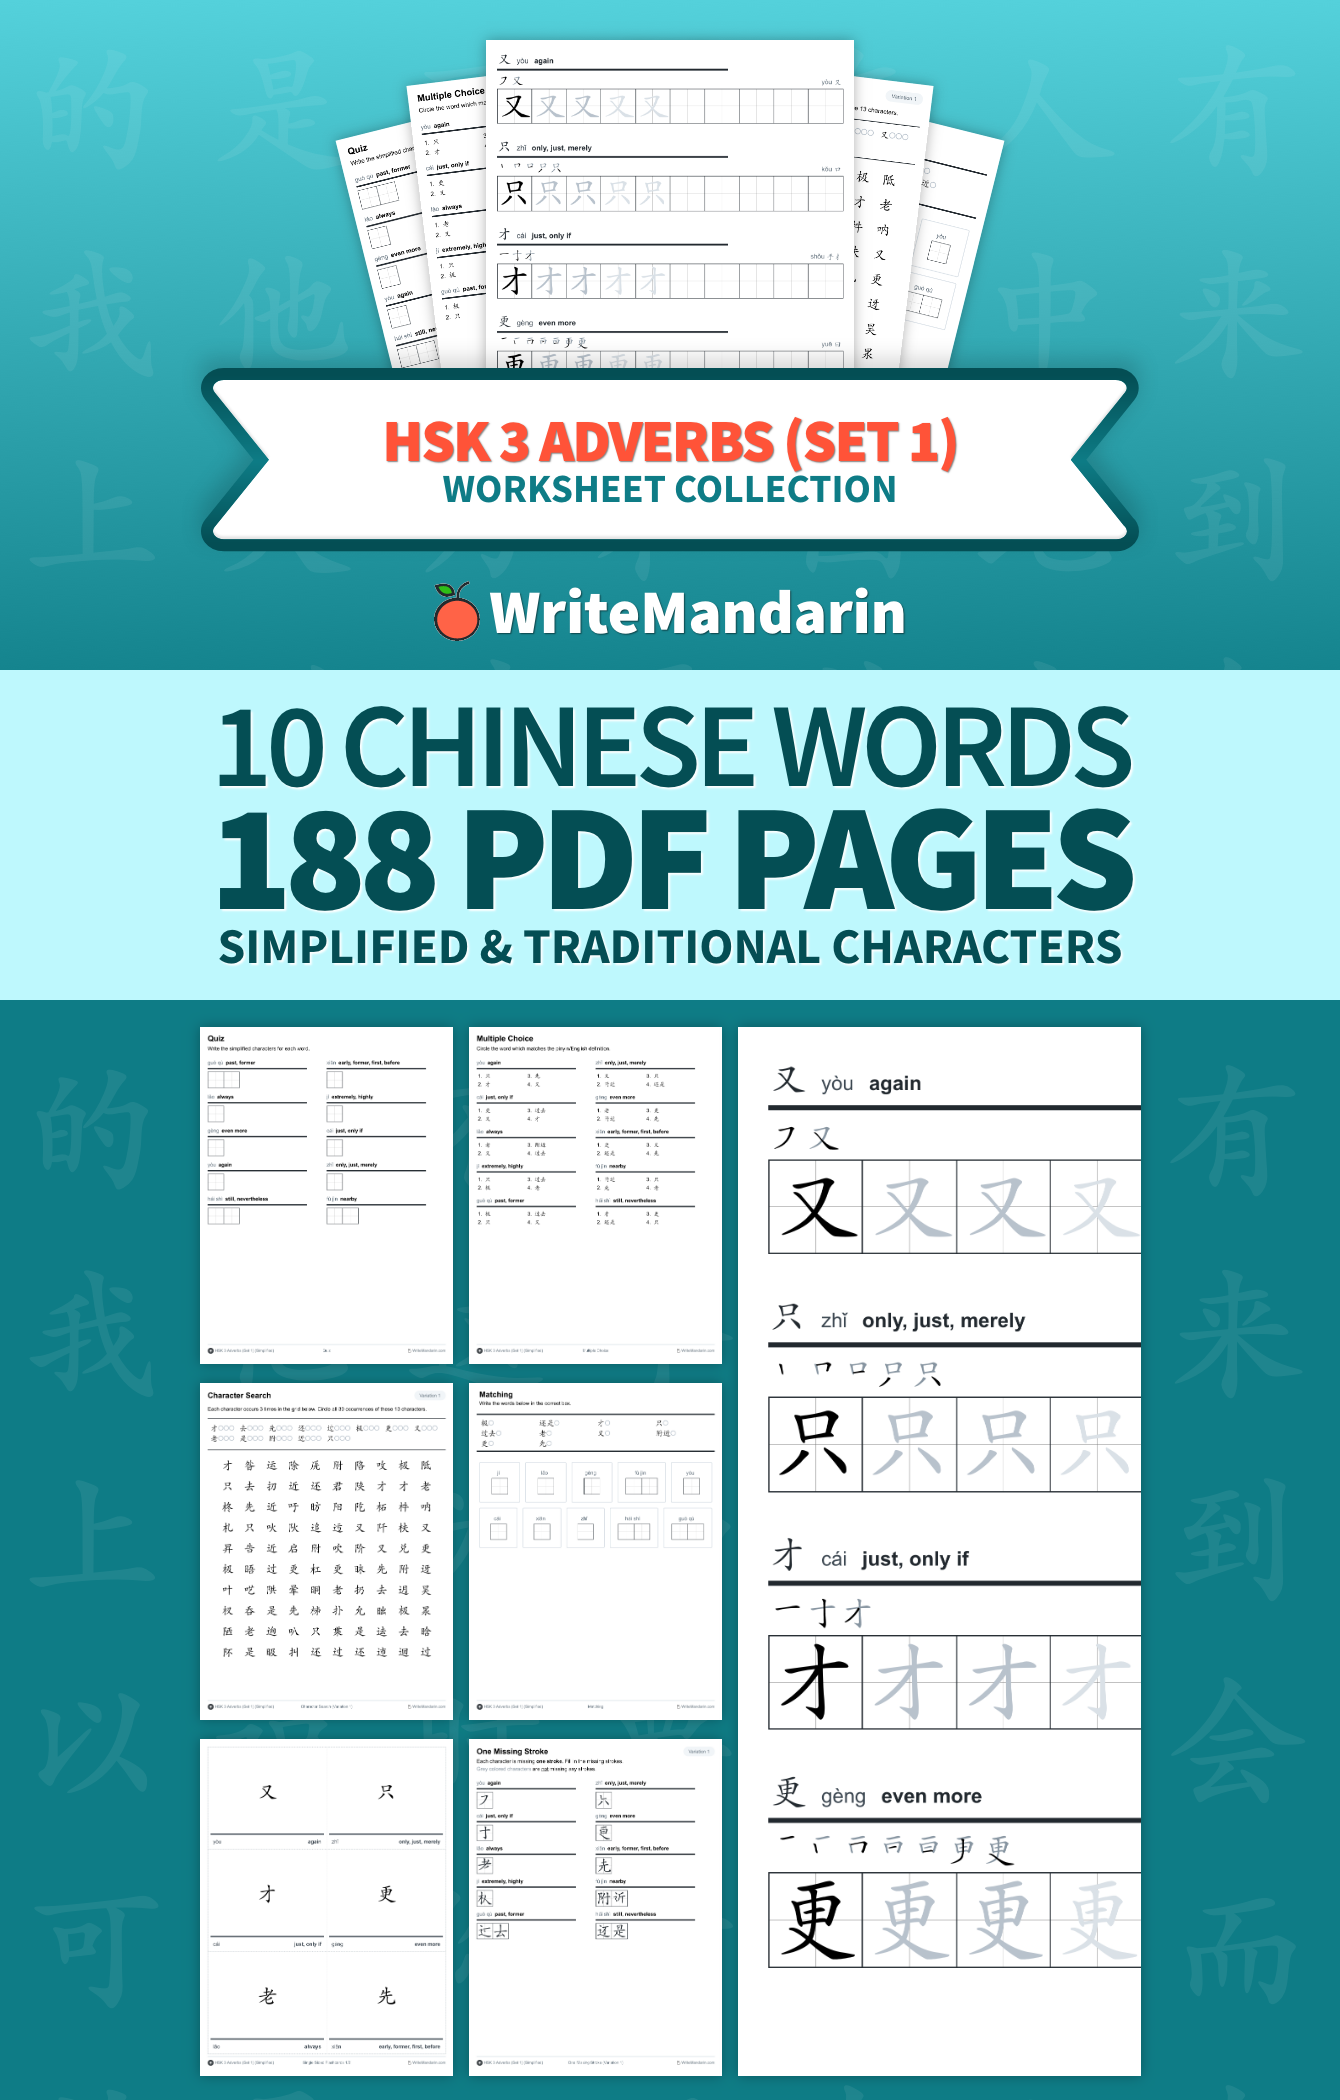 Preview image of HSK 3 Adverbs (Set 1) worksheet collection